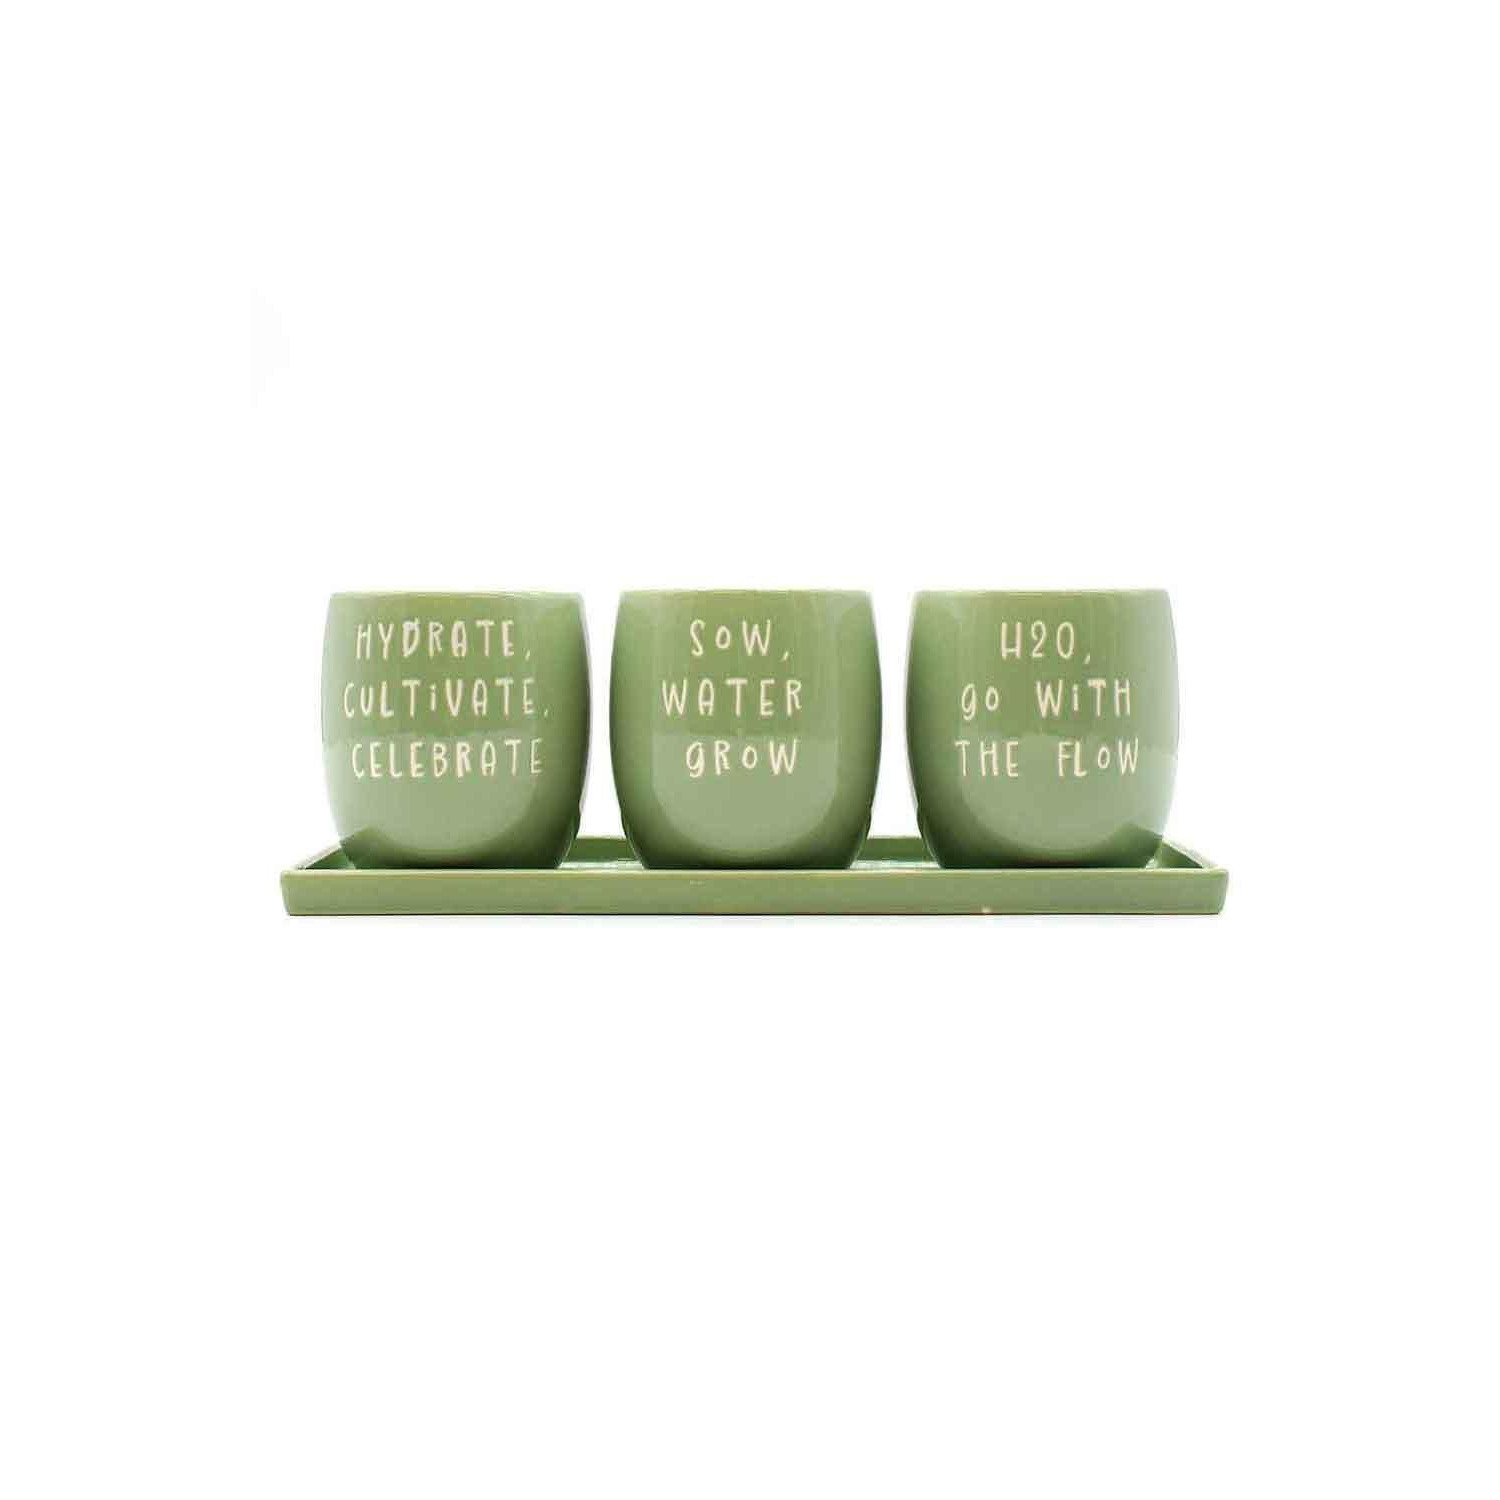 Set of 3 Green Slogan Ceramic Planters with Tray - image 1